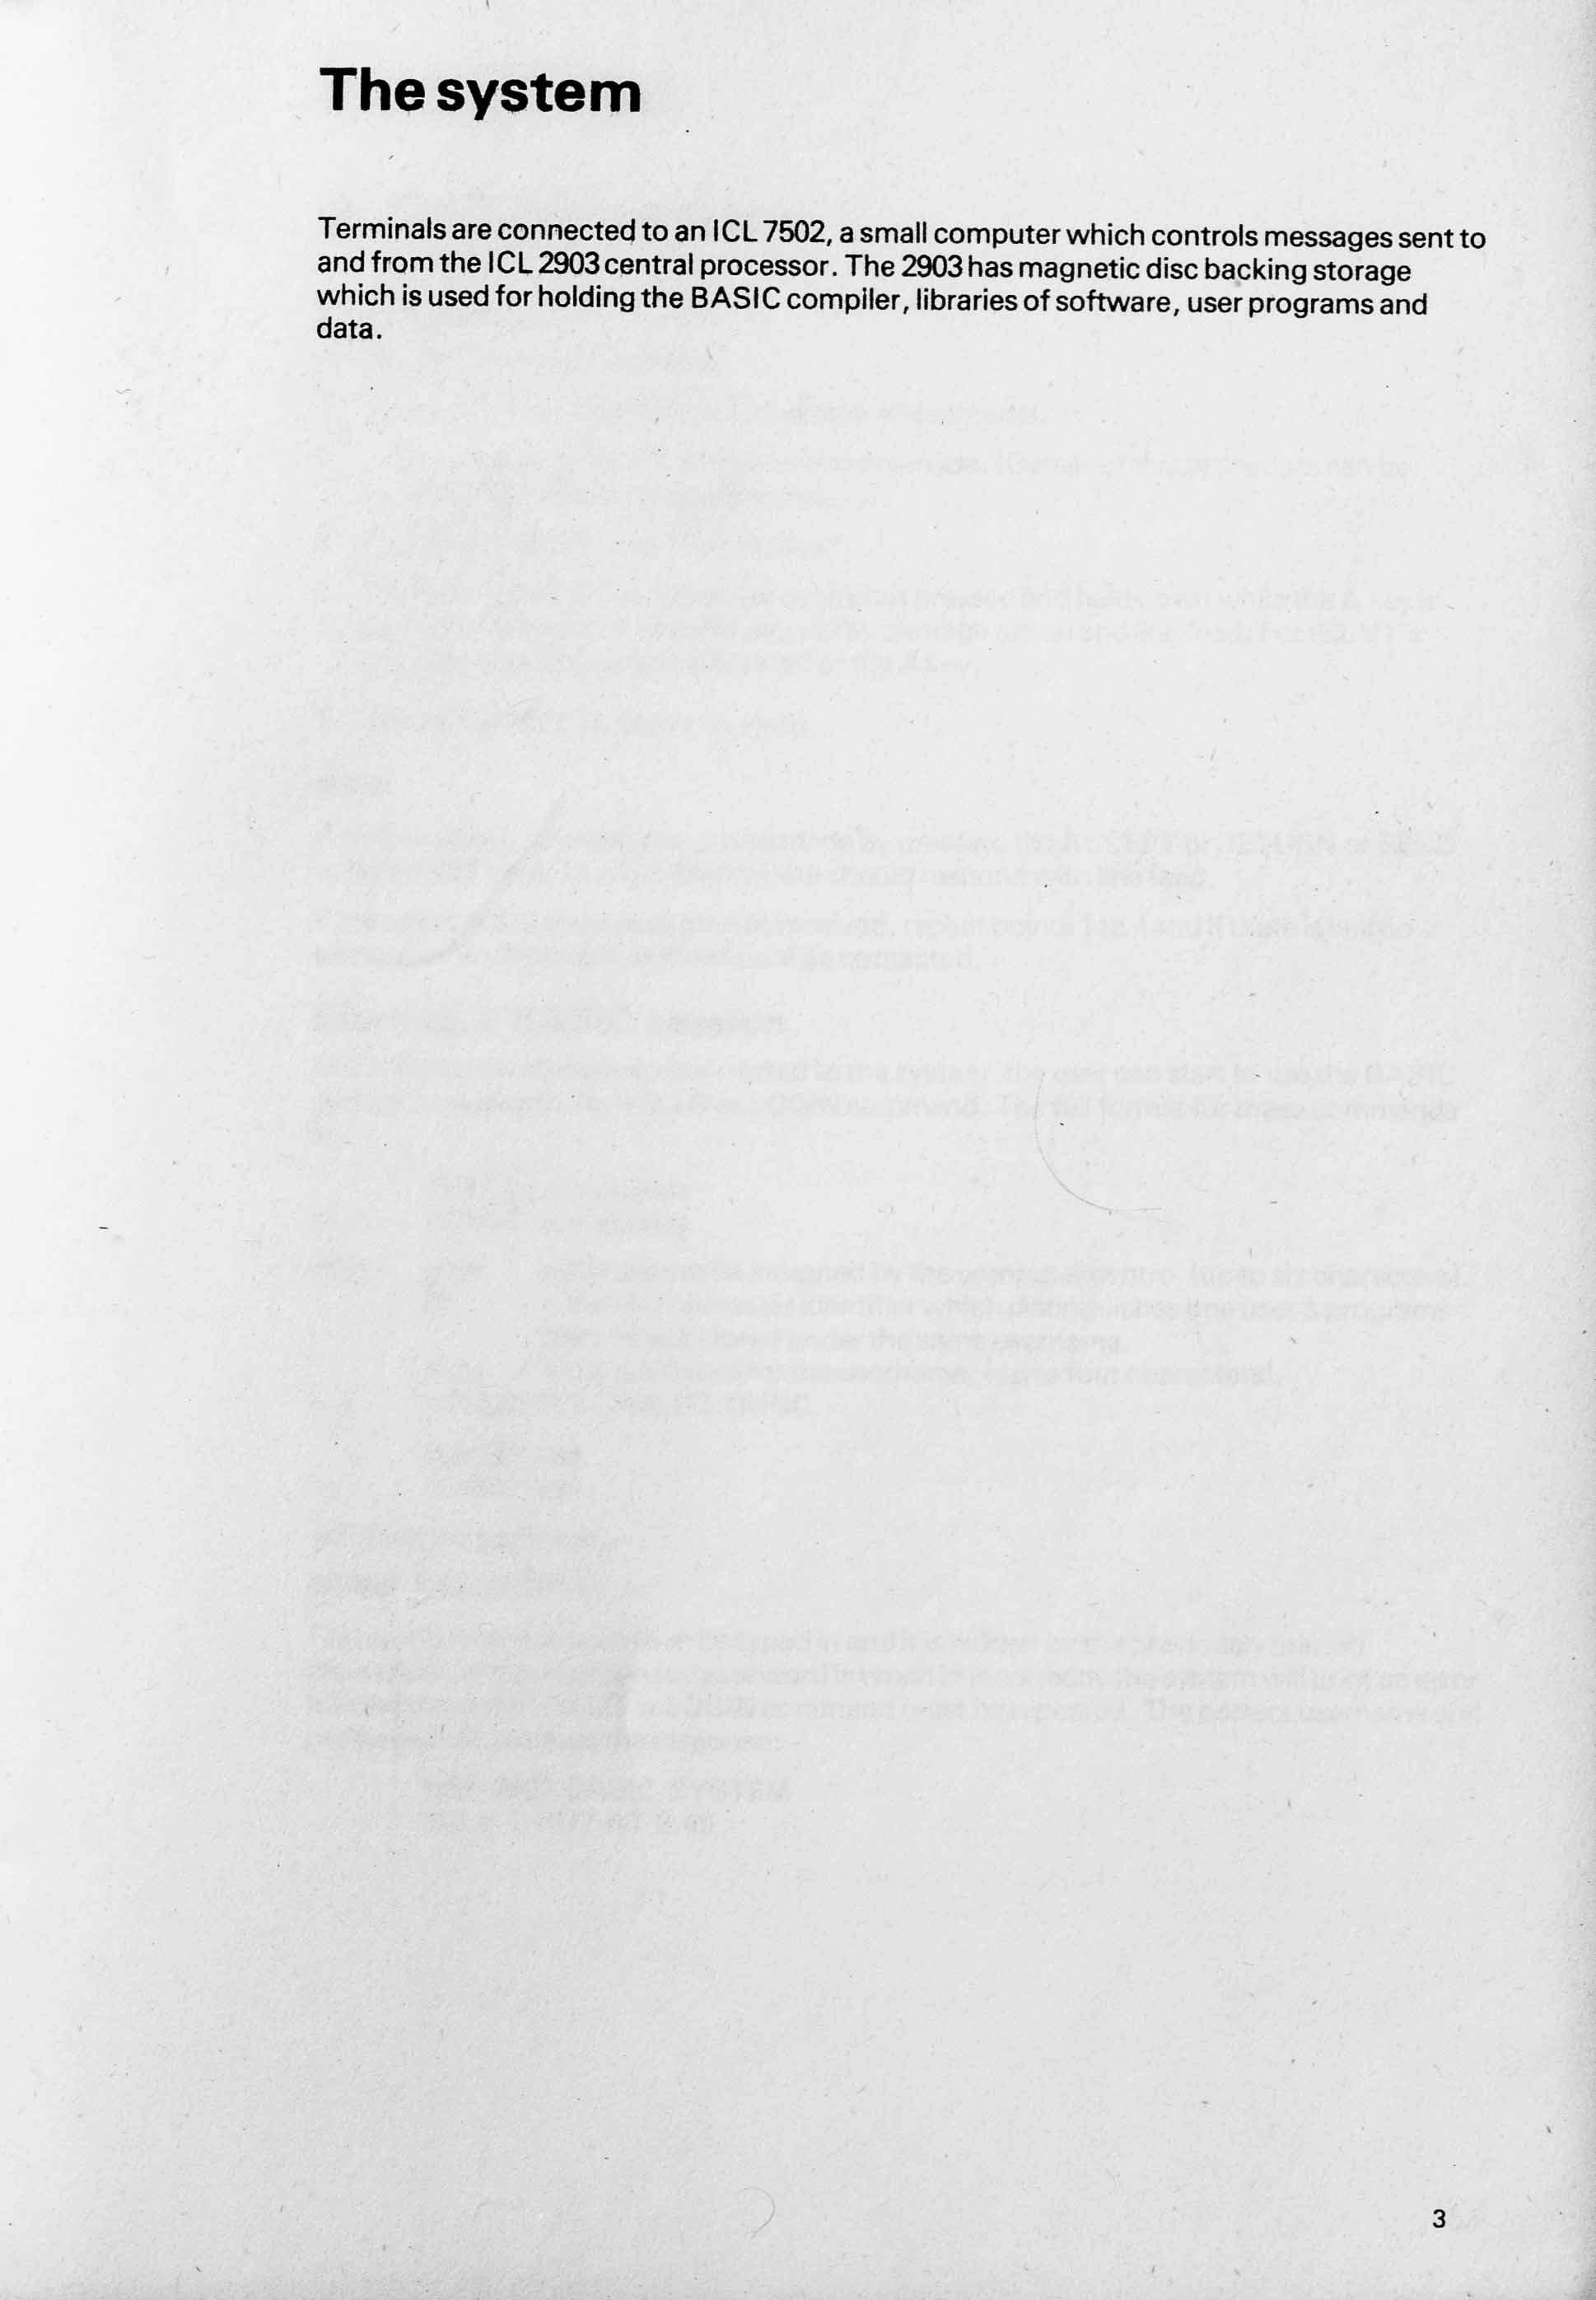 Scan of system page